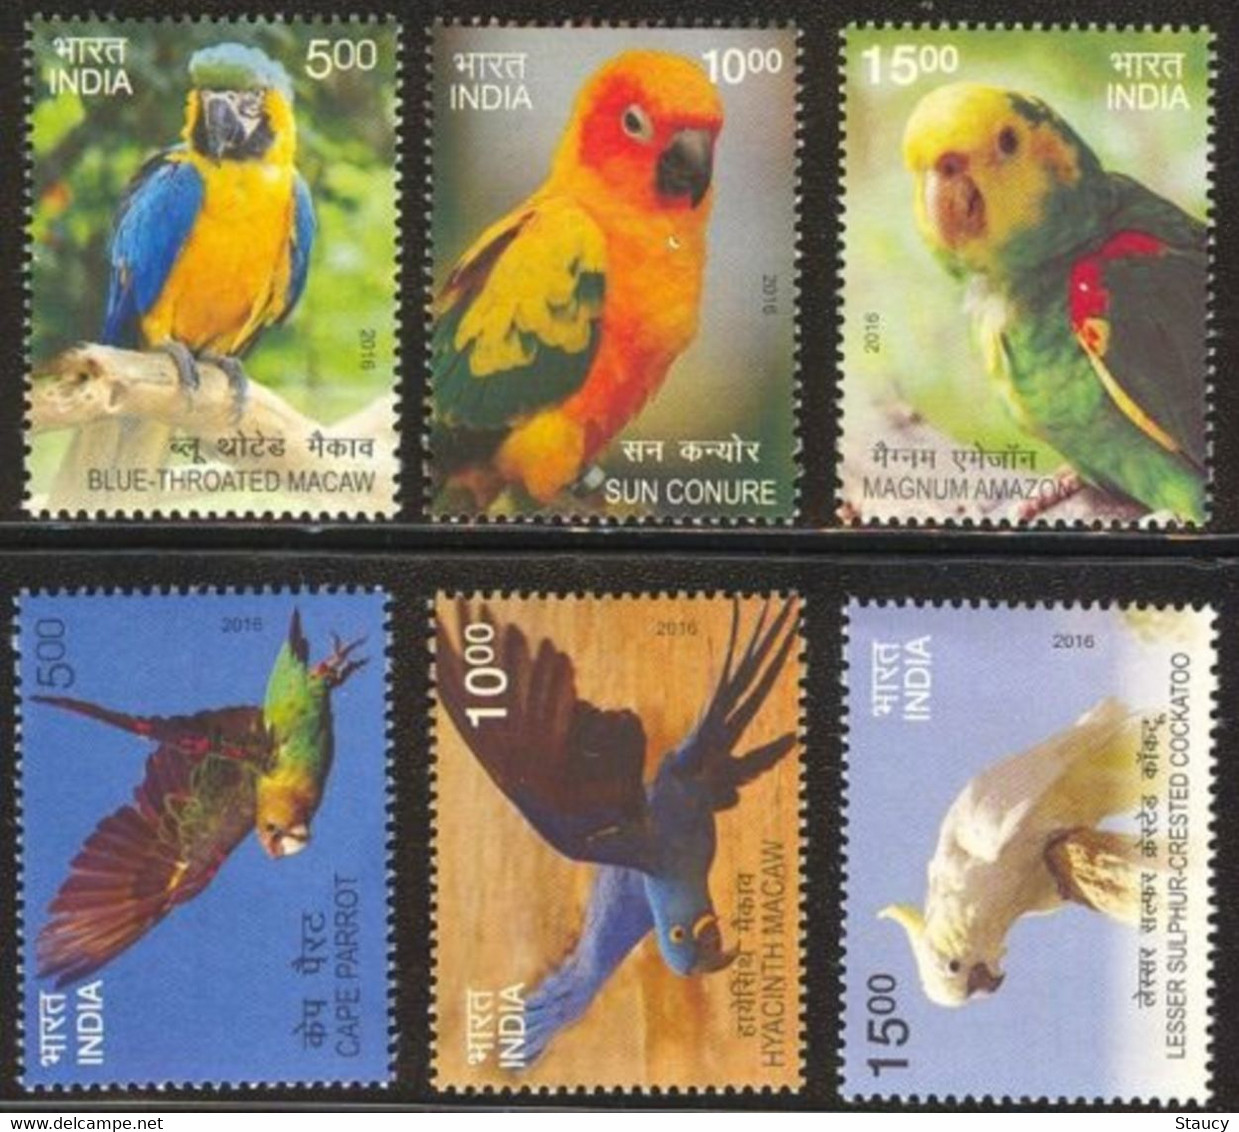 India 2016 Exotic Birds 6v Complete Set MNH Macaw Parrot Amazon Crested, As Per Scan - Coucous, Touracos